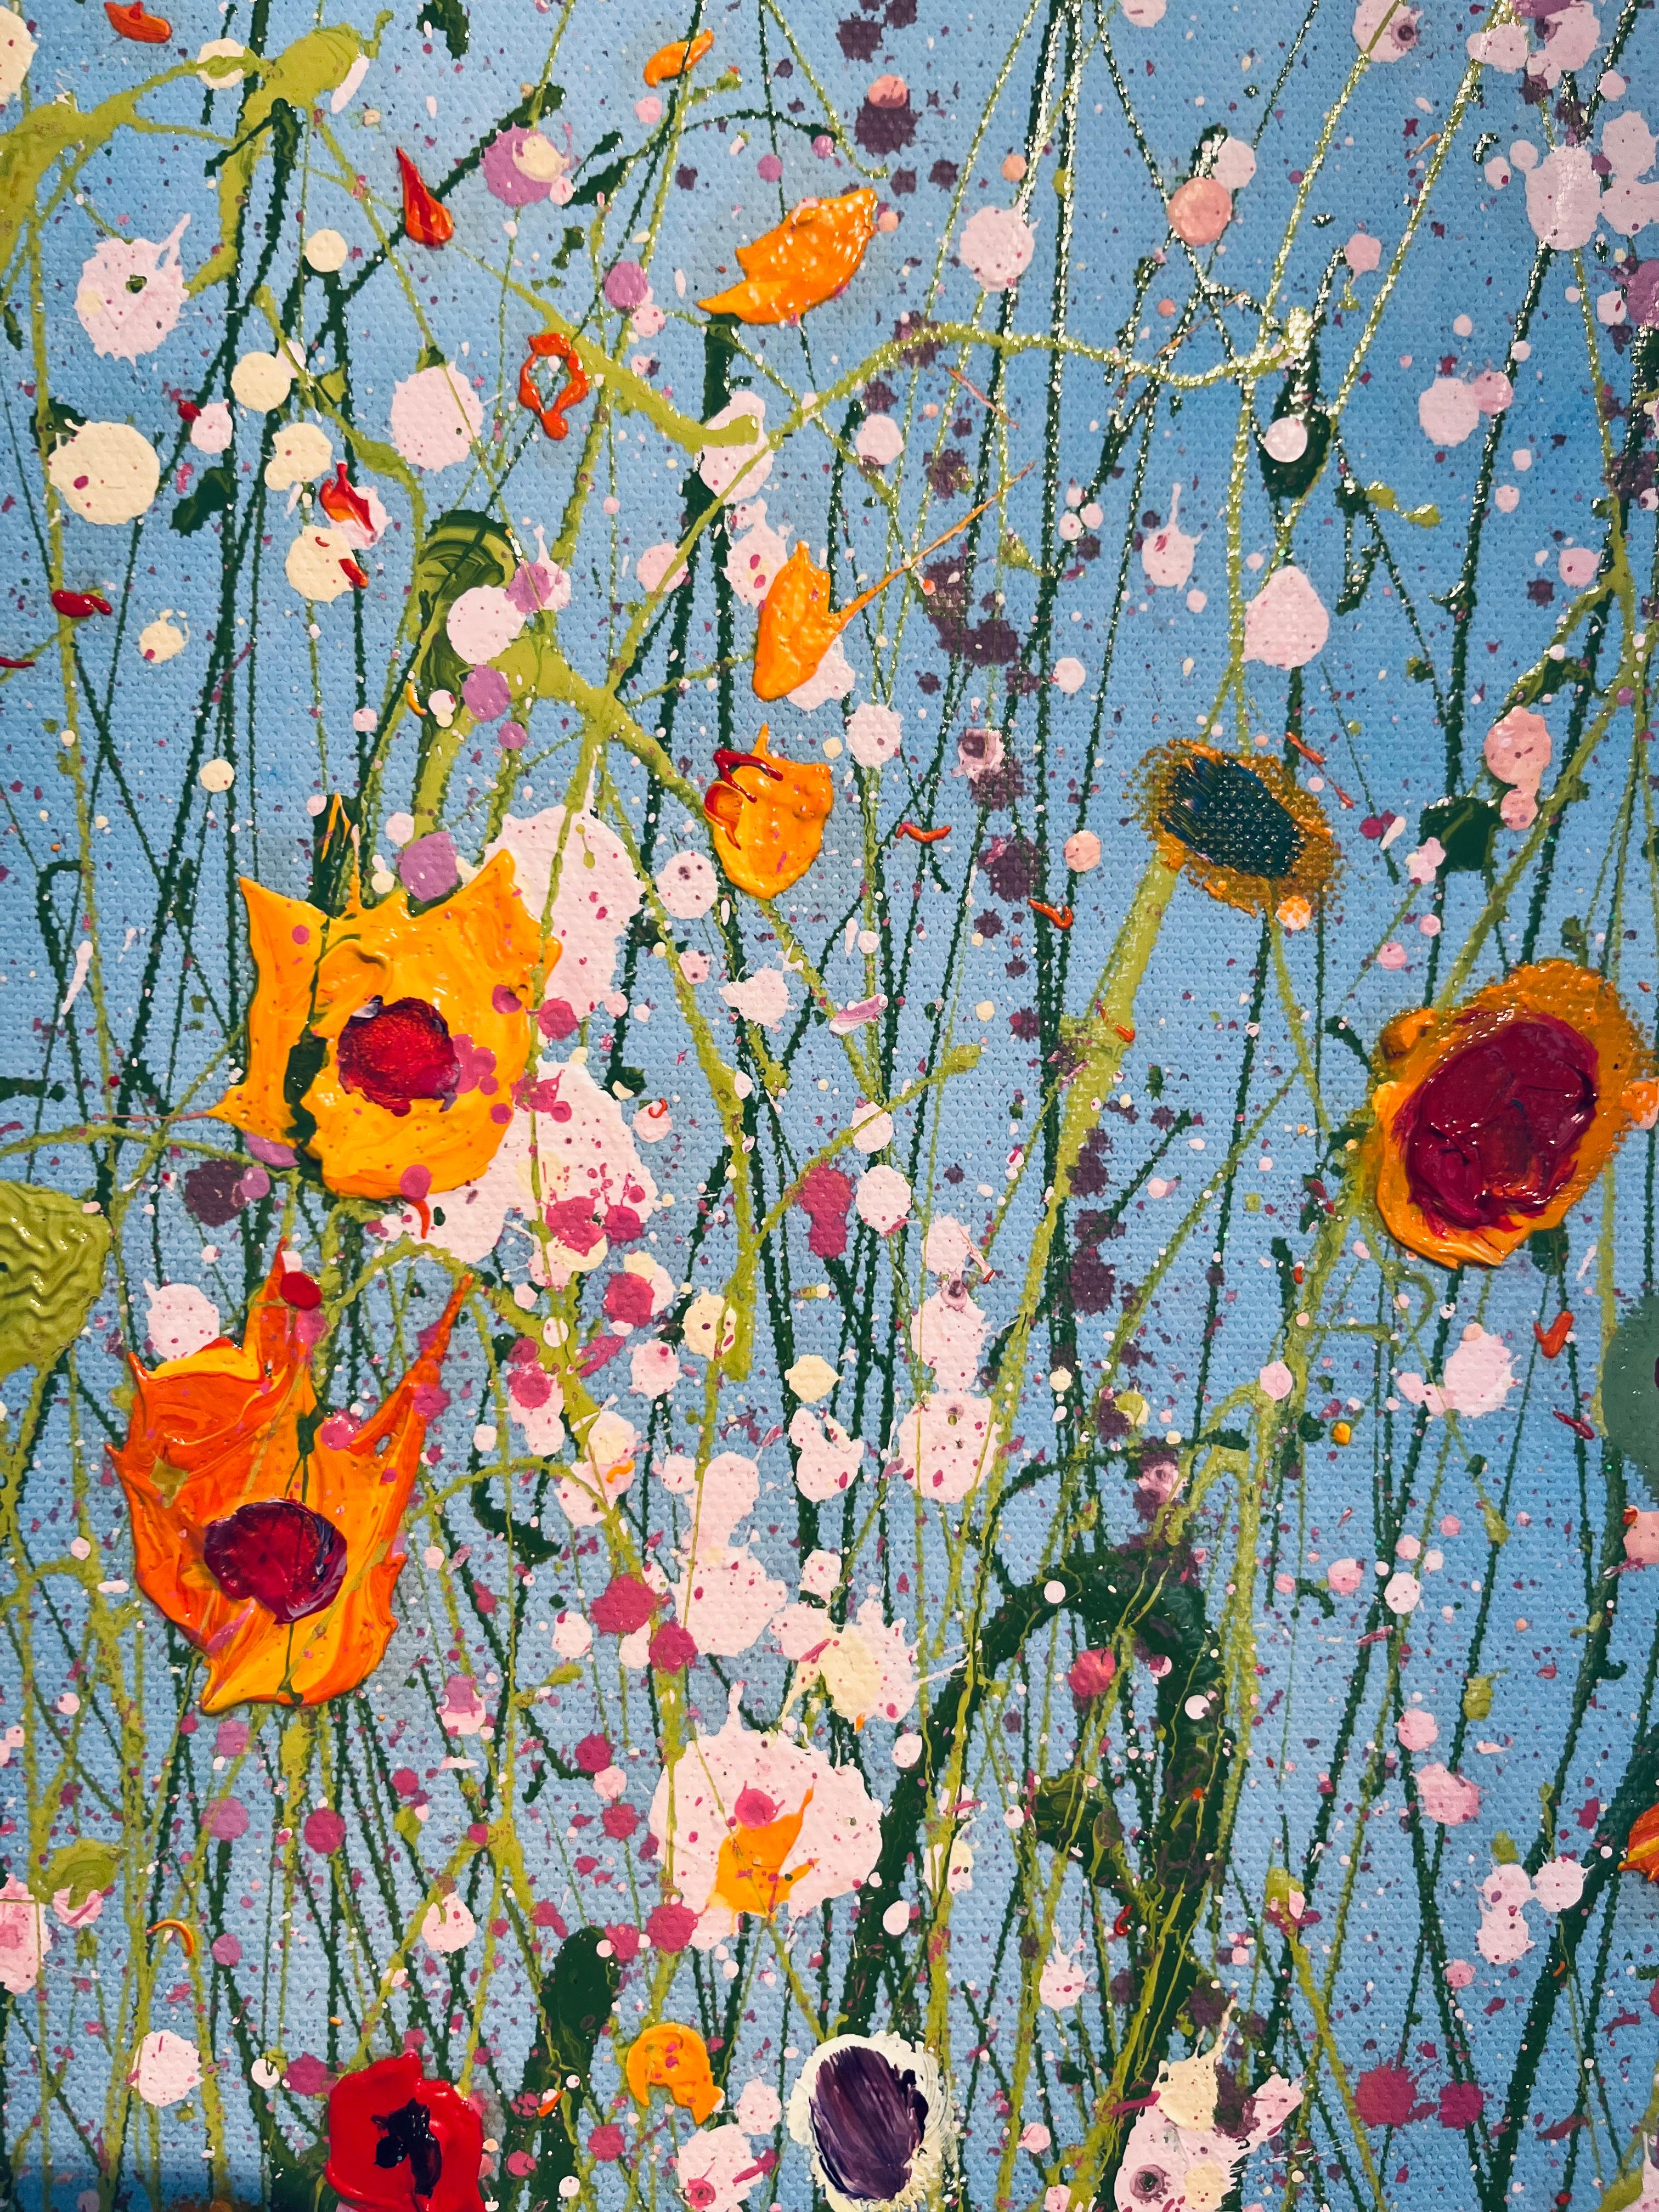 The Garden Of Love-original abstract floral landscape painting- modern artwork - Naturalistic Painting by Yvonne Coomber